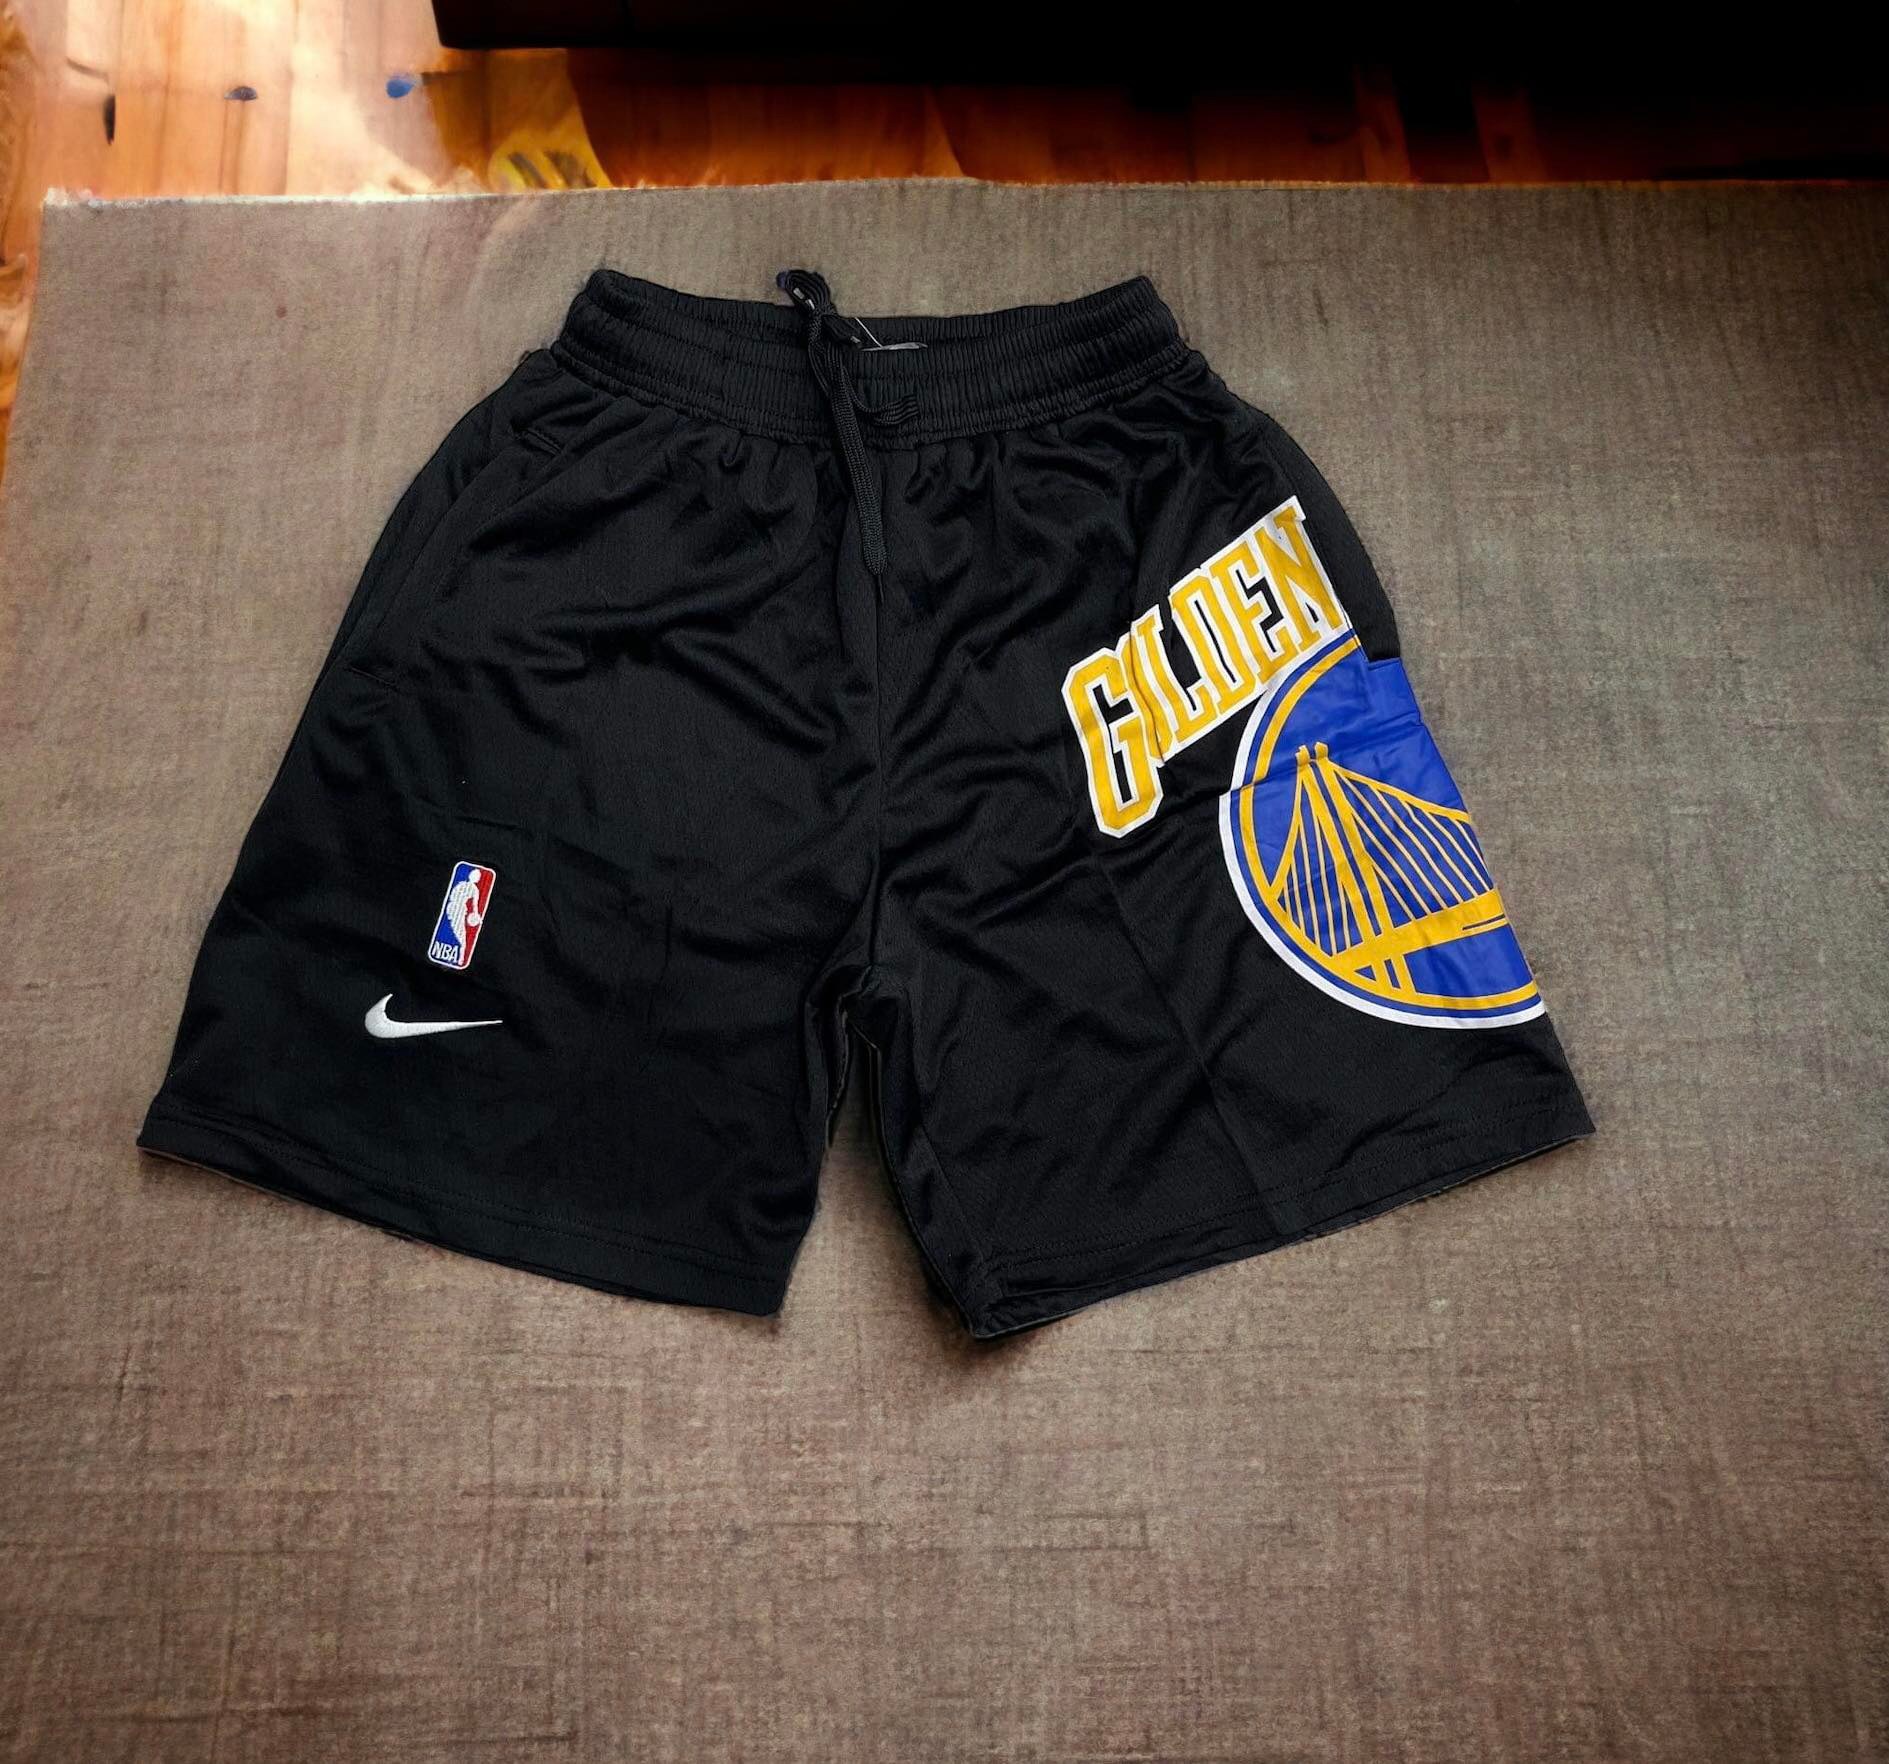 WawaKID]Best Selling And High Quality GOLDEN STATE WARRIORS Basketball  Jogger Shorts Dri-Fit Trendy Men's Shorts Vintage Version